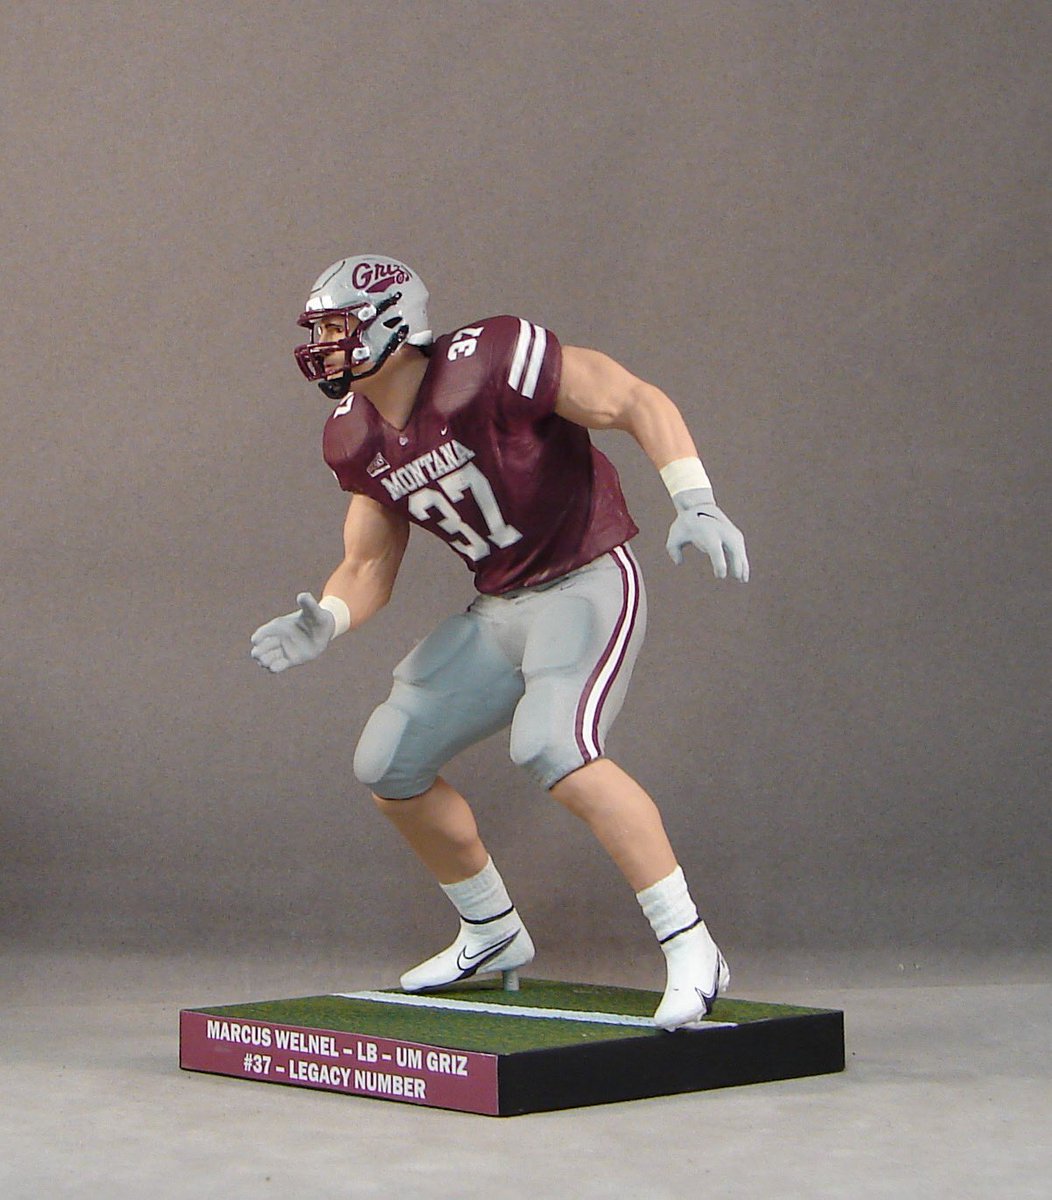 The latest custom figure from @bigskycustoms @MarcusWelnel who wore legacy number 37 last season for the @UMGRIZZLIES request for the second figure of Marcus from dad Jason. #bigskycustoms #umgriz #grizfootball #customfigure #3d #3dart